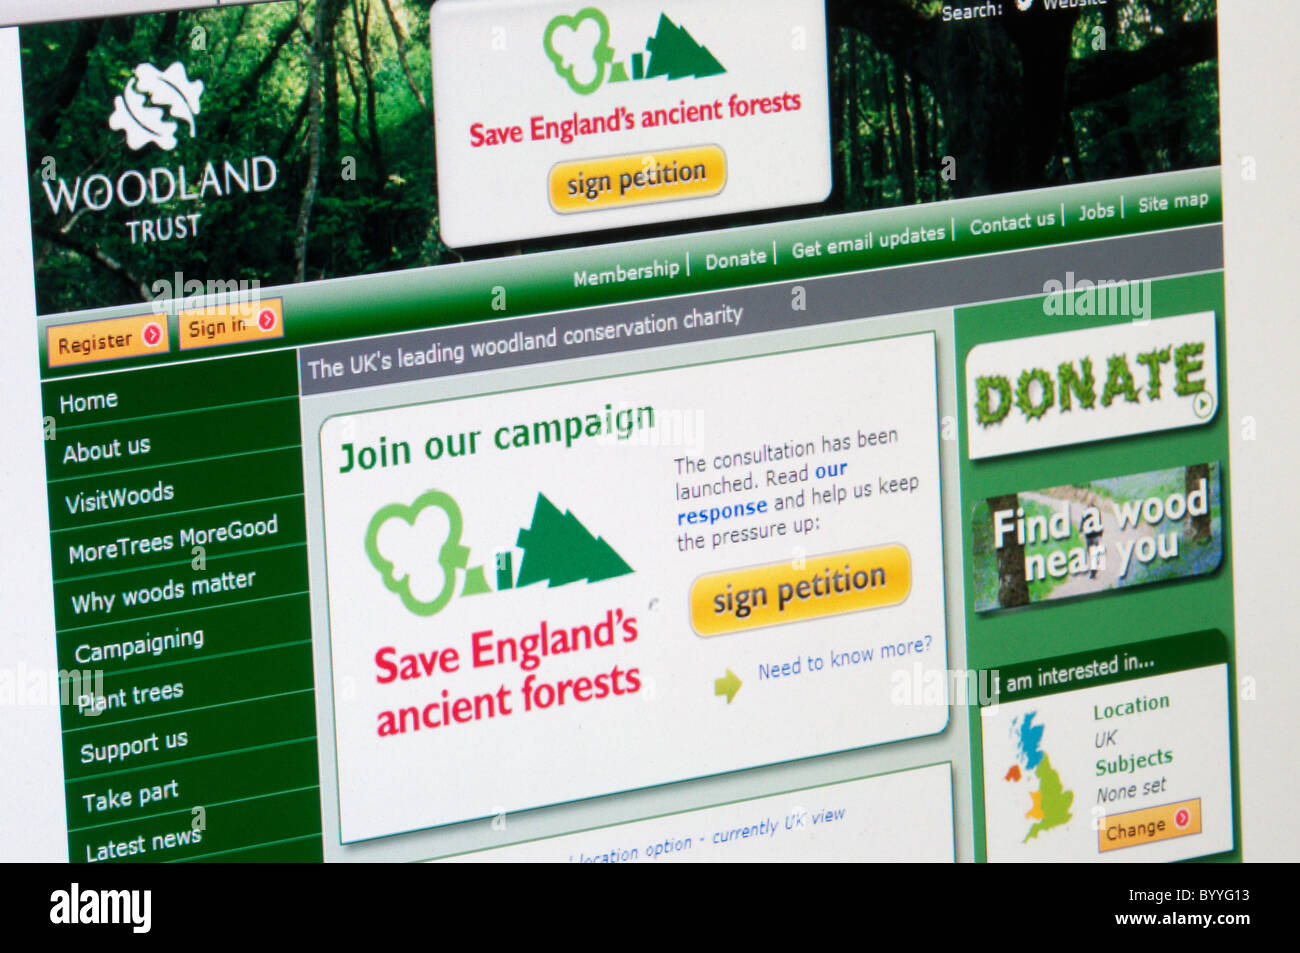 Woodland Trust website asks 'Join our campaign Save England's ancient forests'. Stock Photo